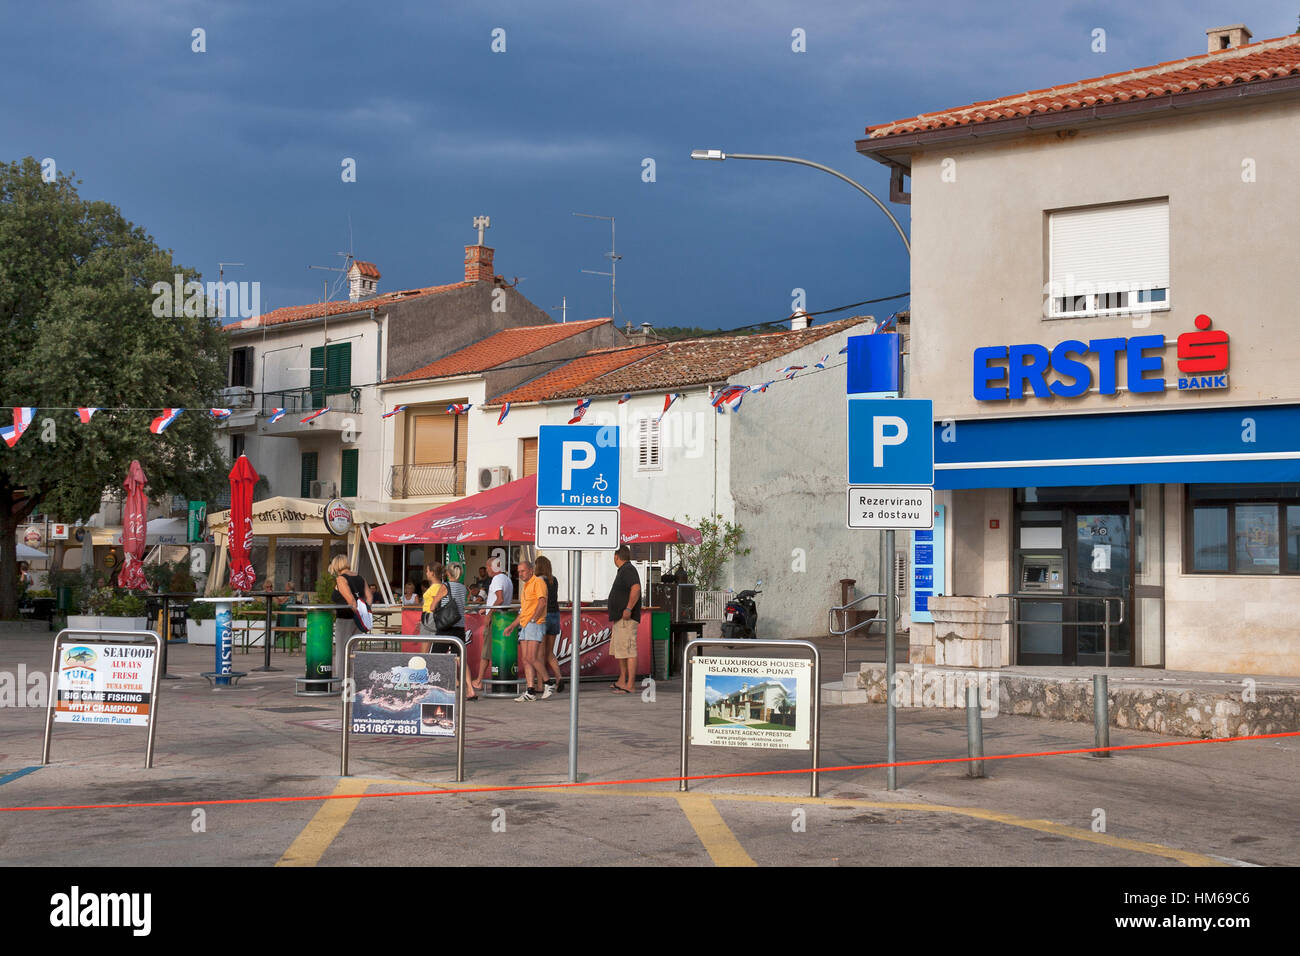 PUNAT, CROATIA - AUGUST 11: Tourists walk along city street in front of Erste Bank on August 11, 2012 in Punat, Croatia. Punat is a municipality in th Stock Photo